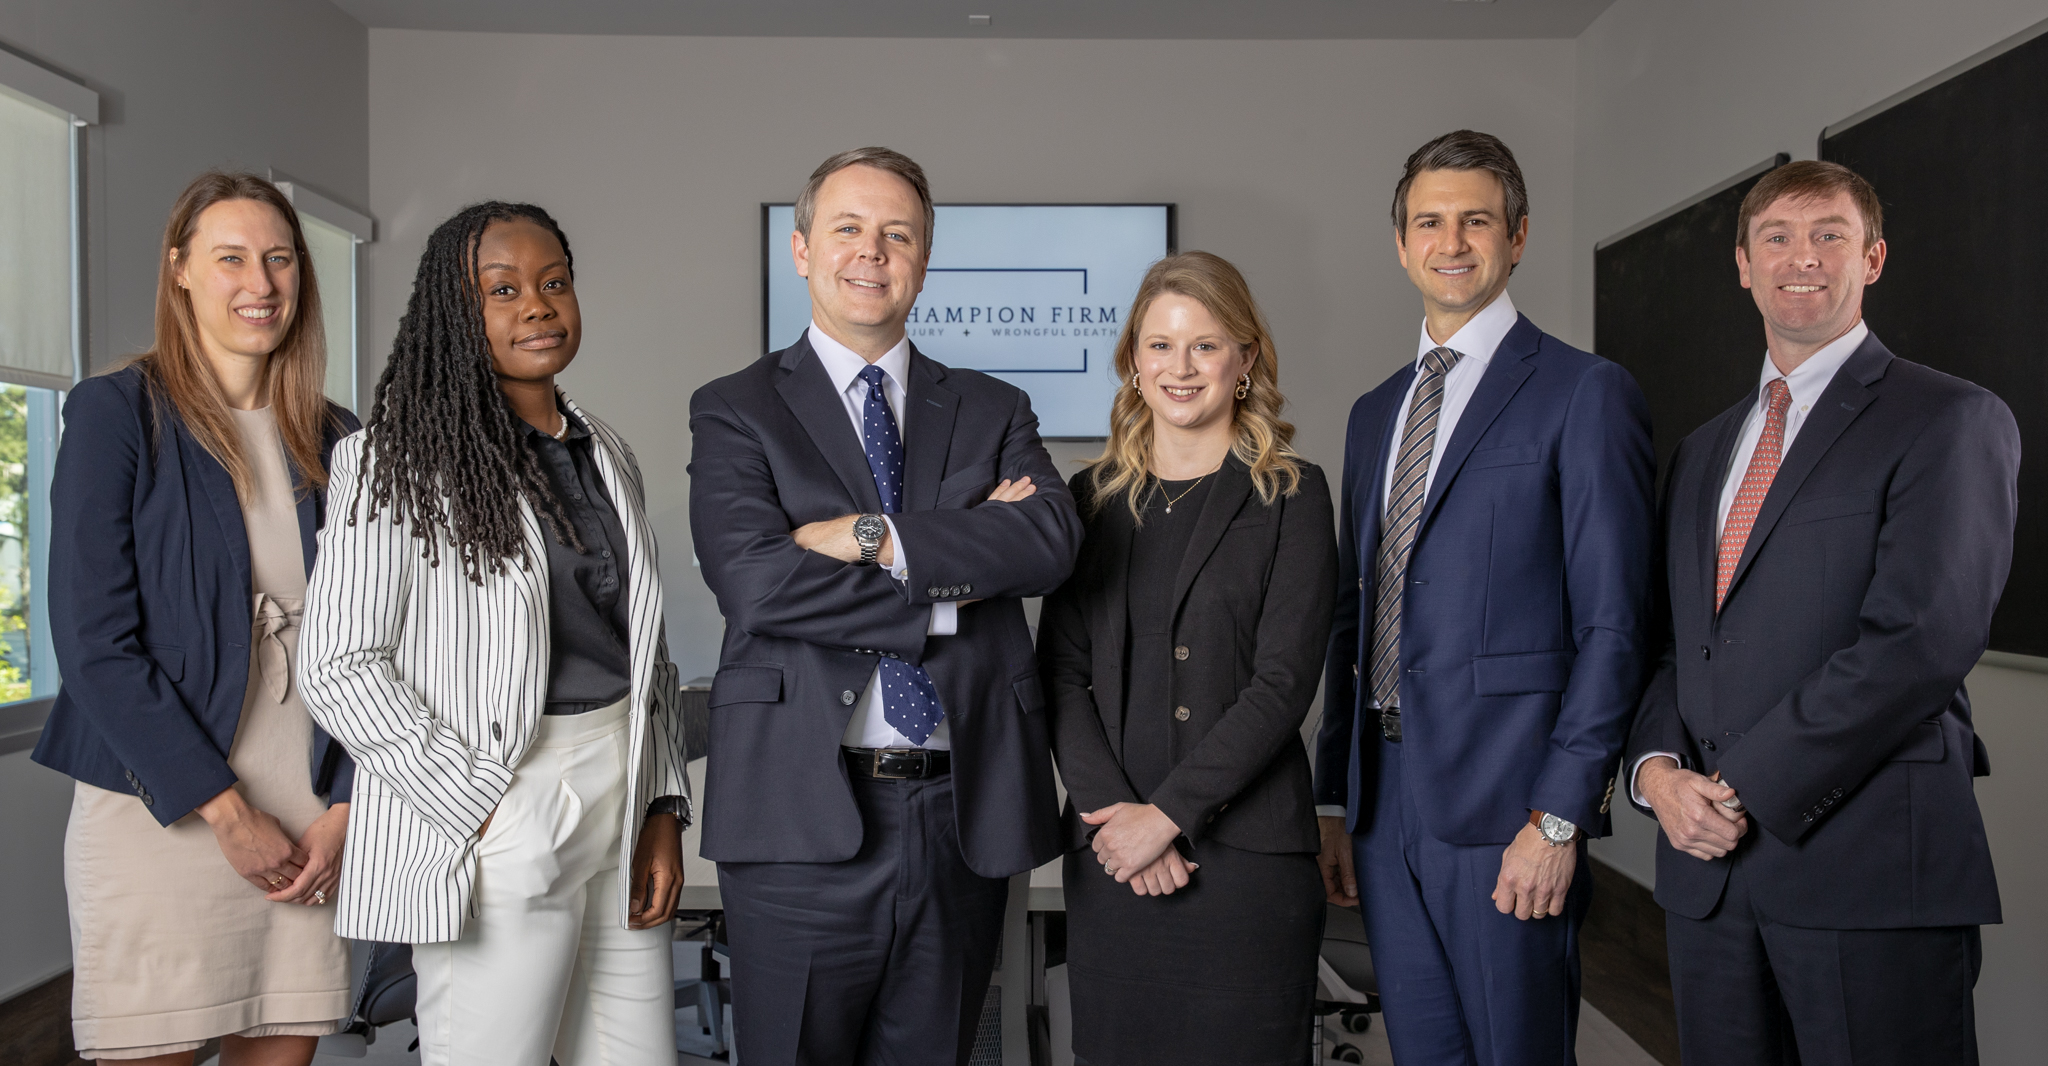 personal injury lawyers at the champion firm